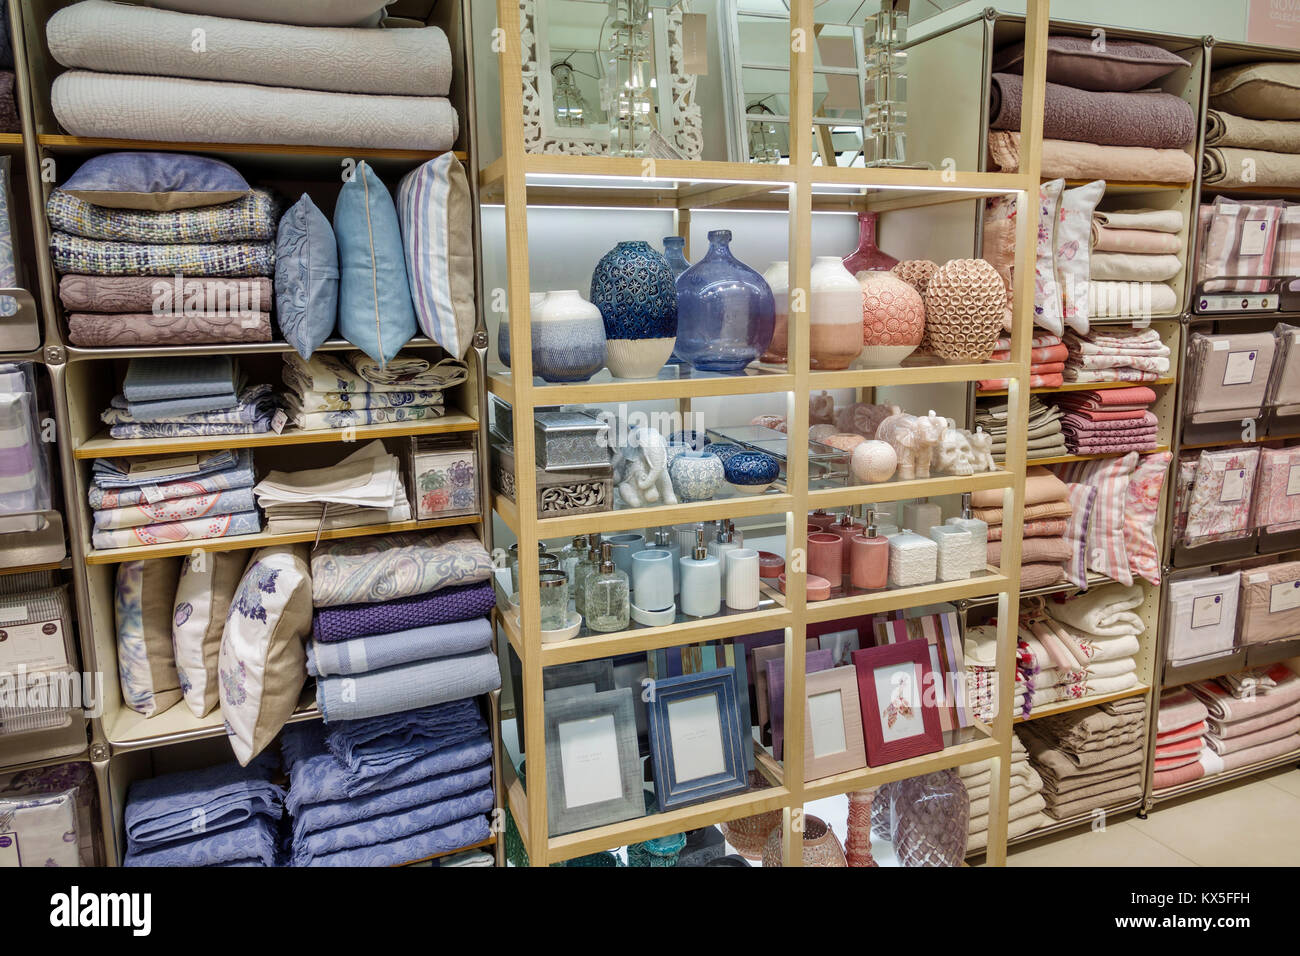 Zara Home Shop Business High Resolution Stock Photography and Images - Alamy